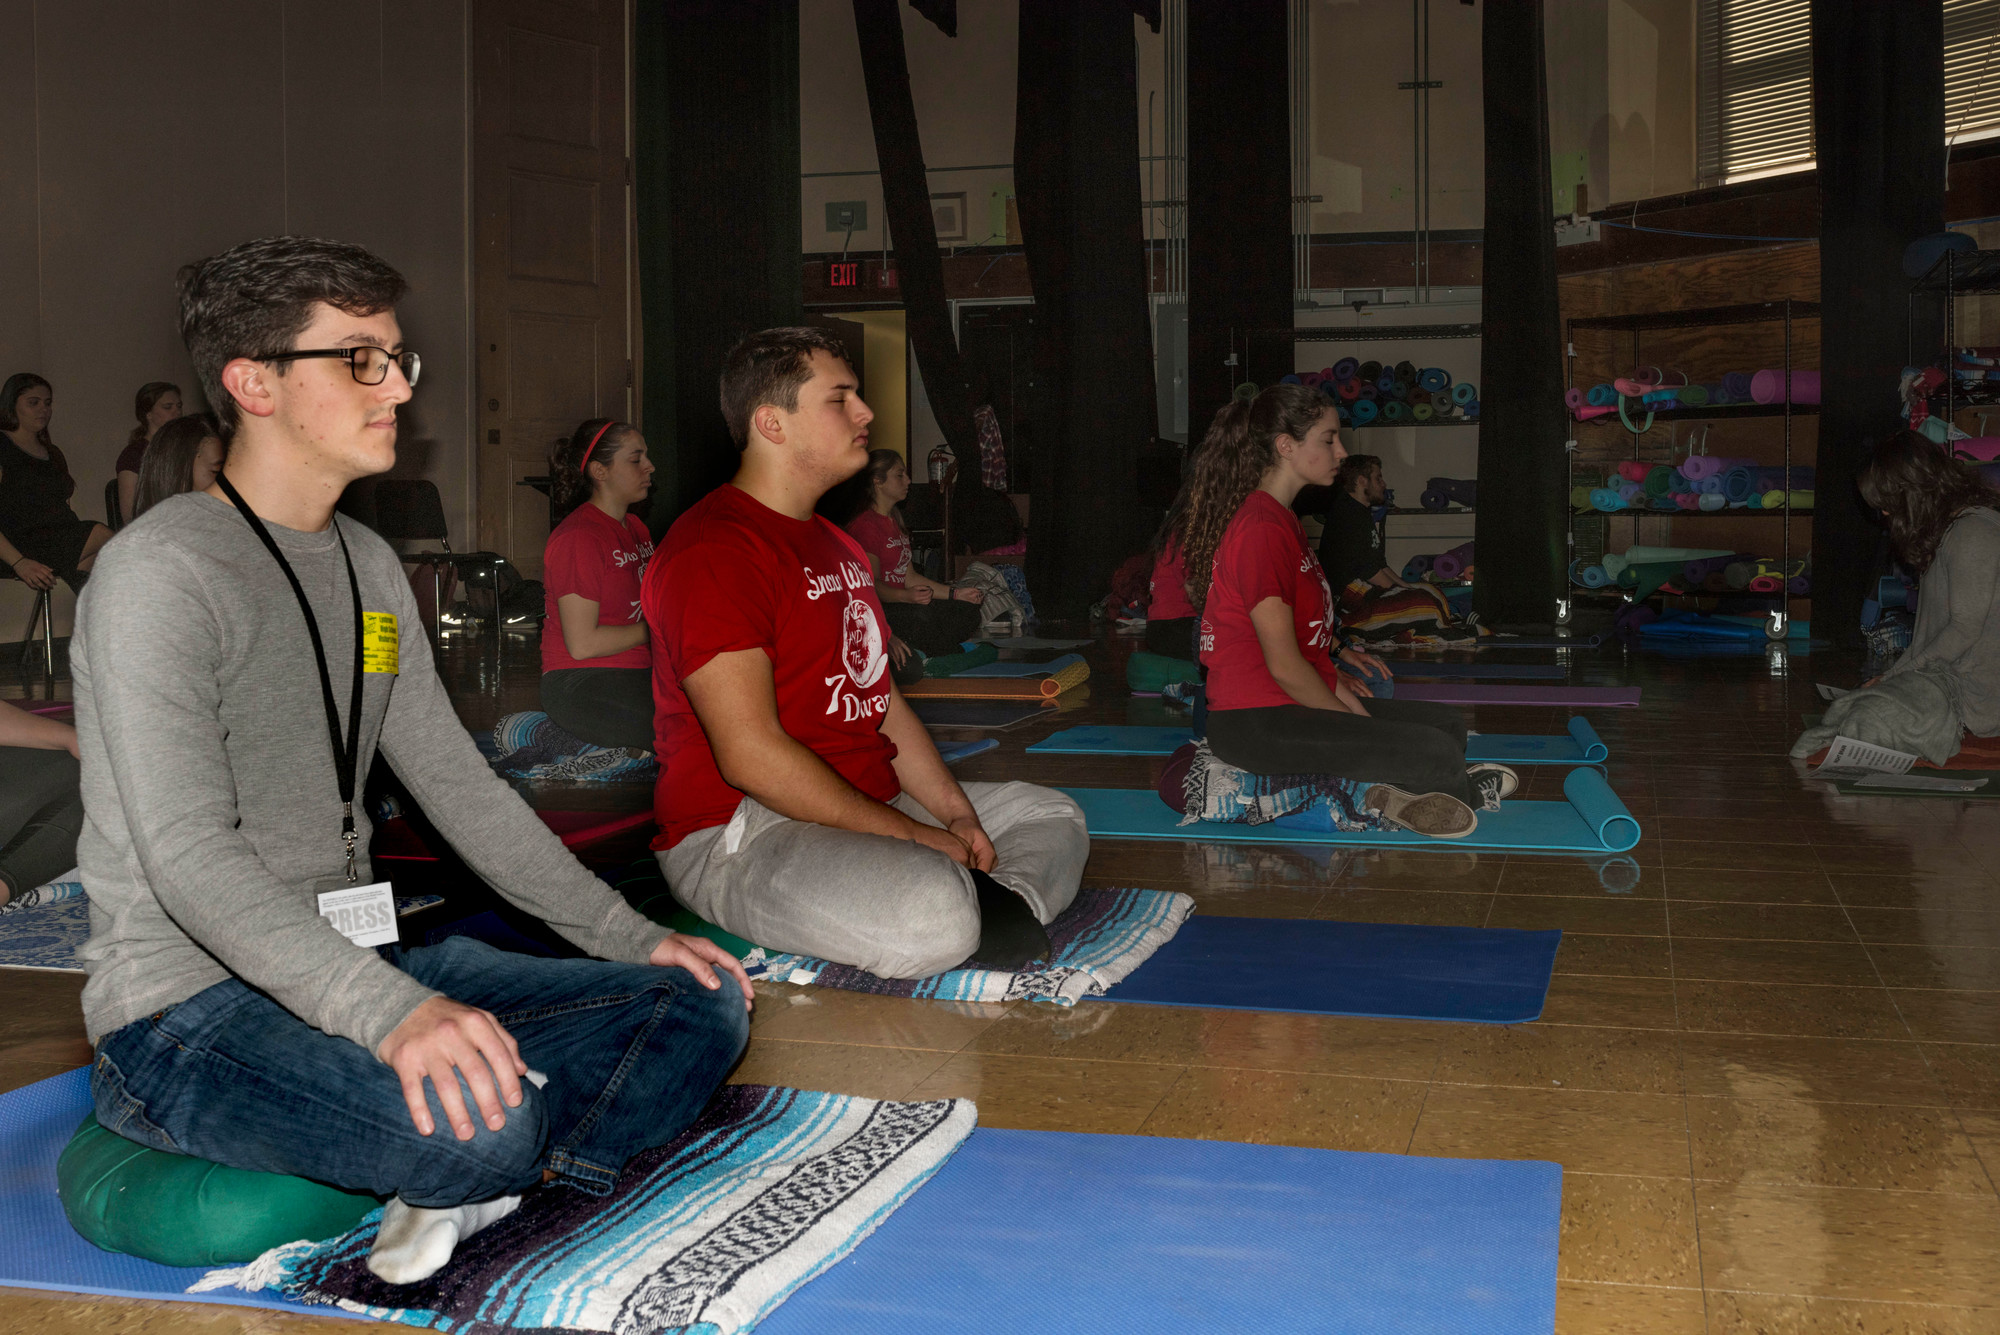 Herald reporter Nick Ciccone attended a new mindfulness meditation course at LHS recently, which DeBetta created after learning the practice at the University of Massachusetts.